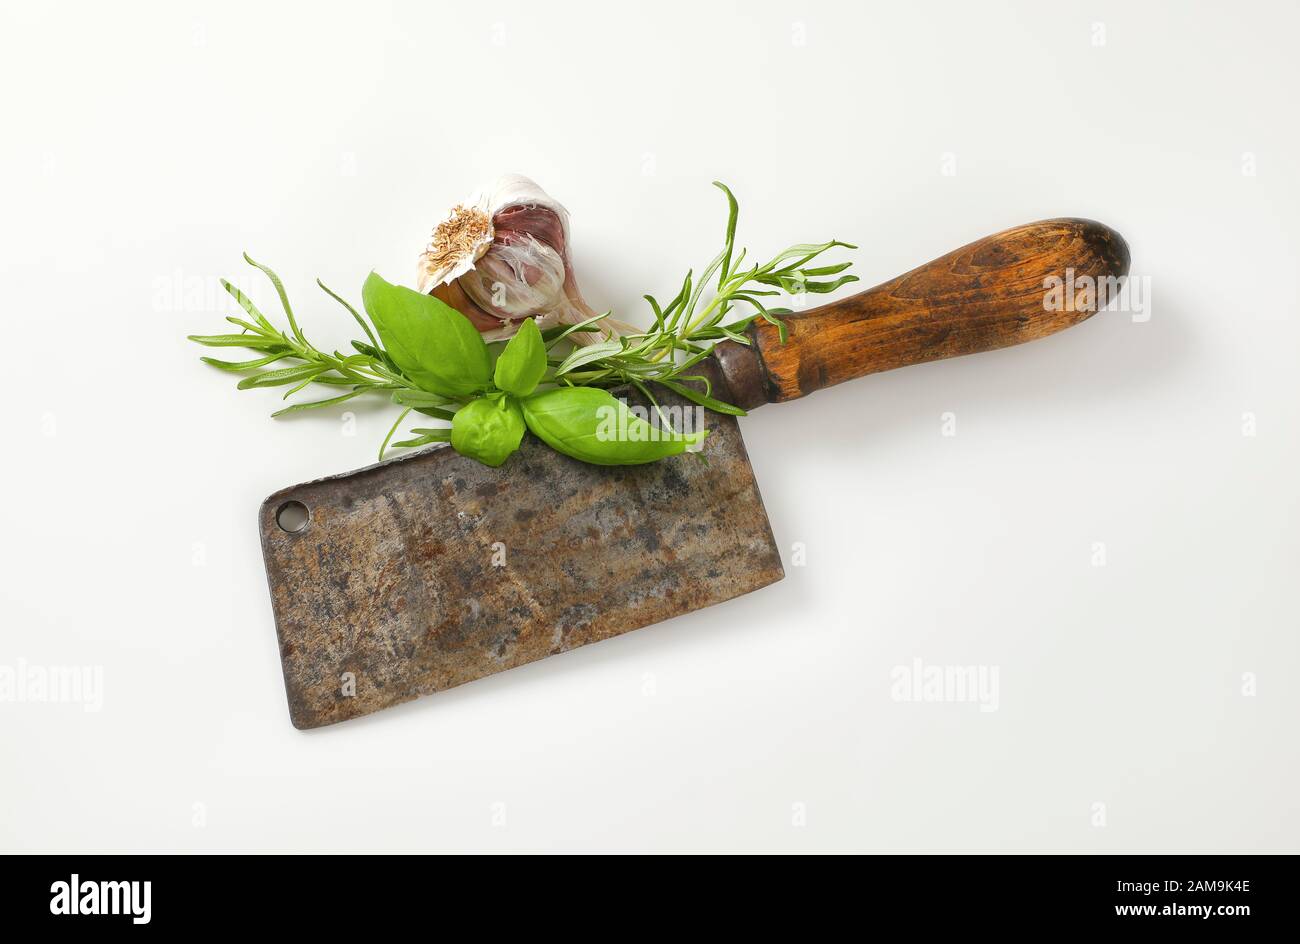 Old rusty meat cleaver knife with fresh basil and rosemary Stock Photo